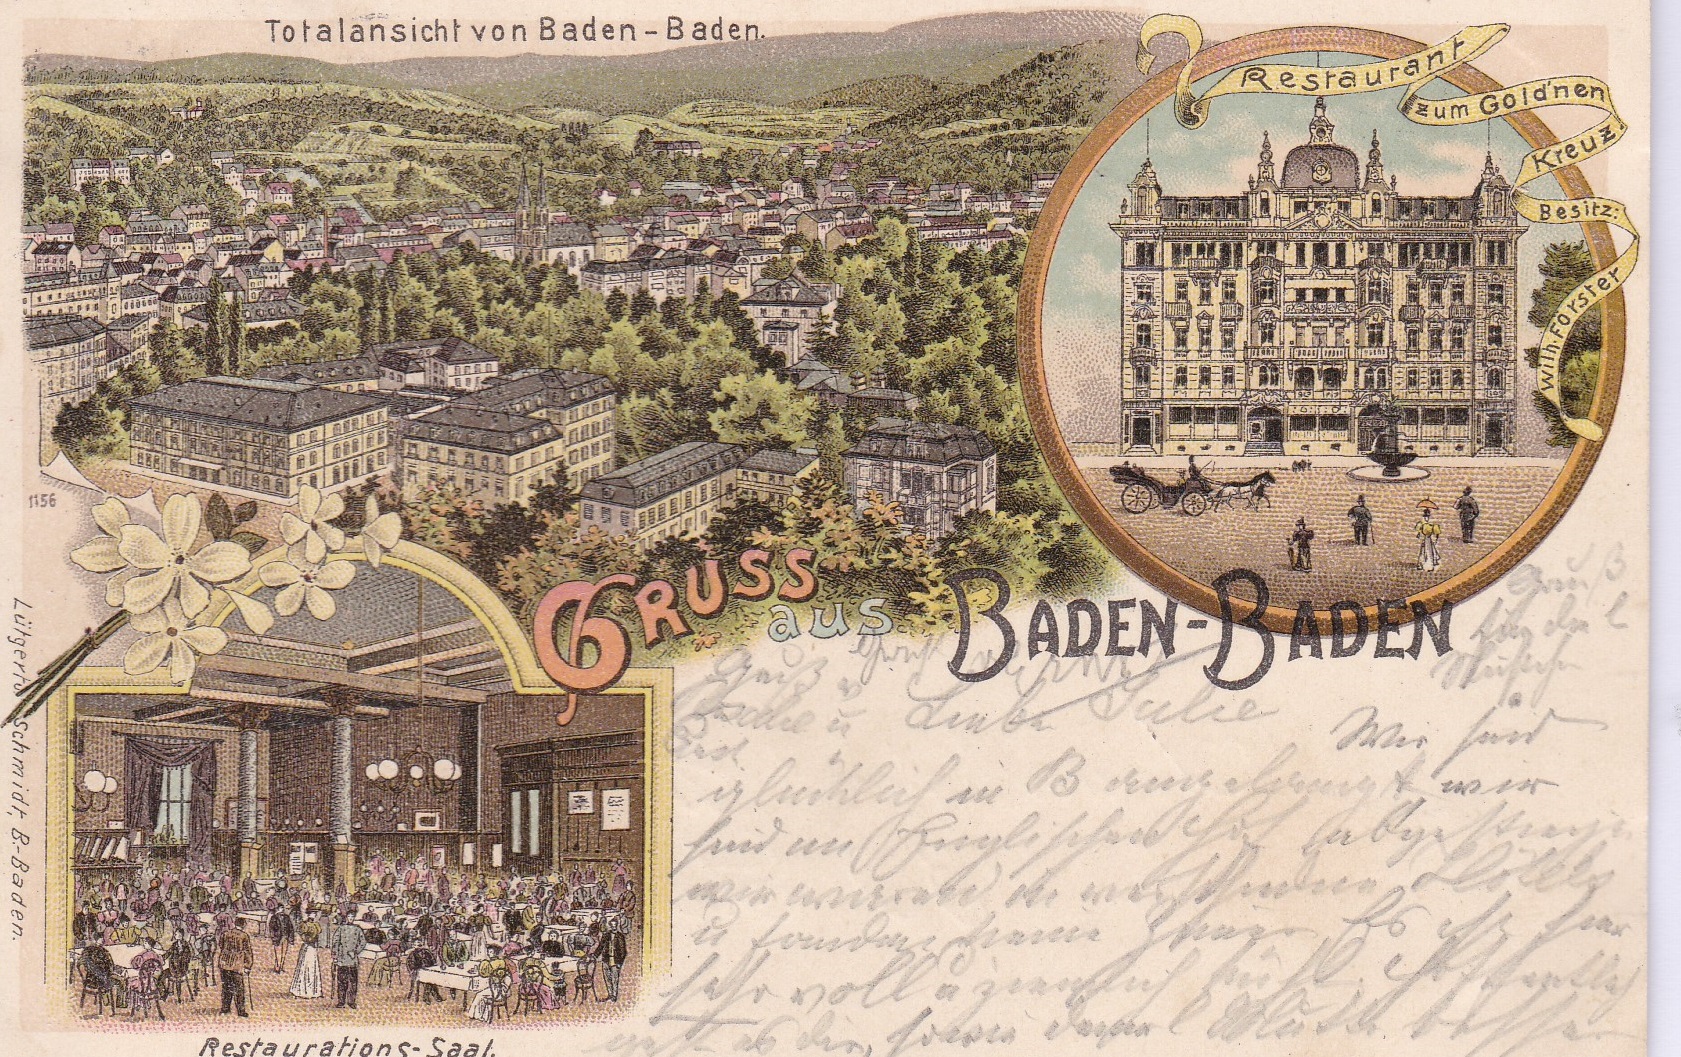 Postcards-Germany 1898-chromo Gruss aus Baden-Baden-panoramic view and restaurant adverts-Golden